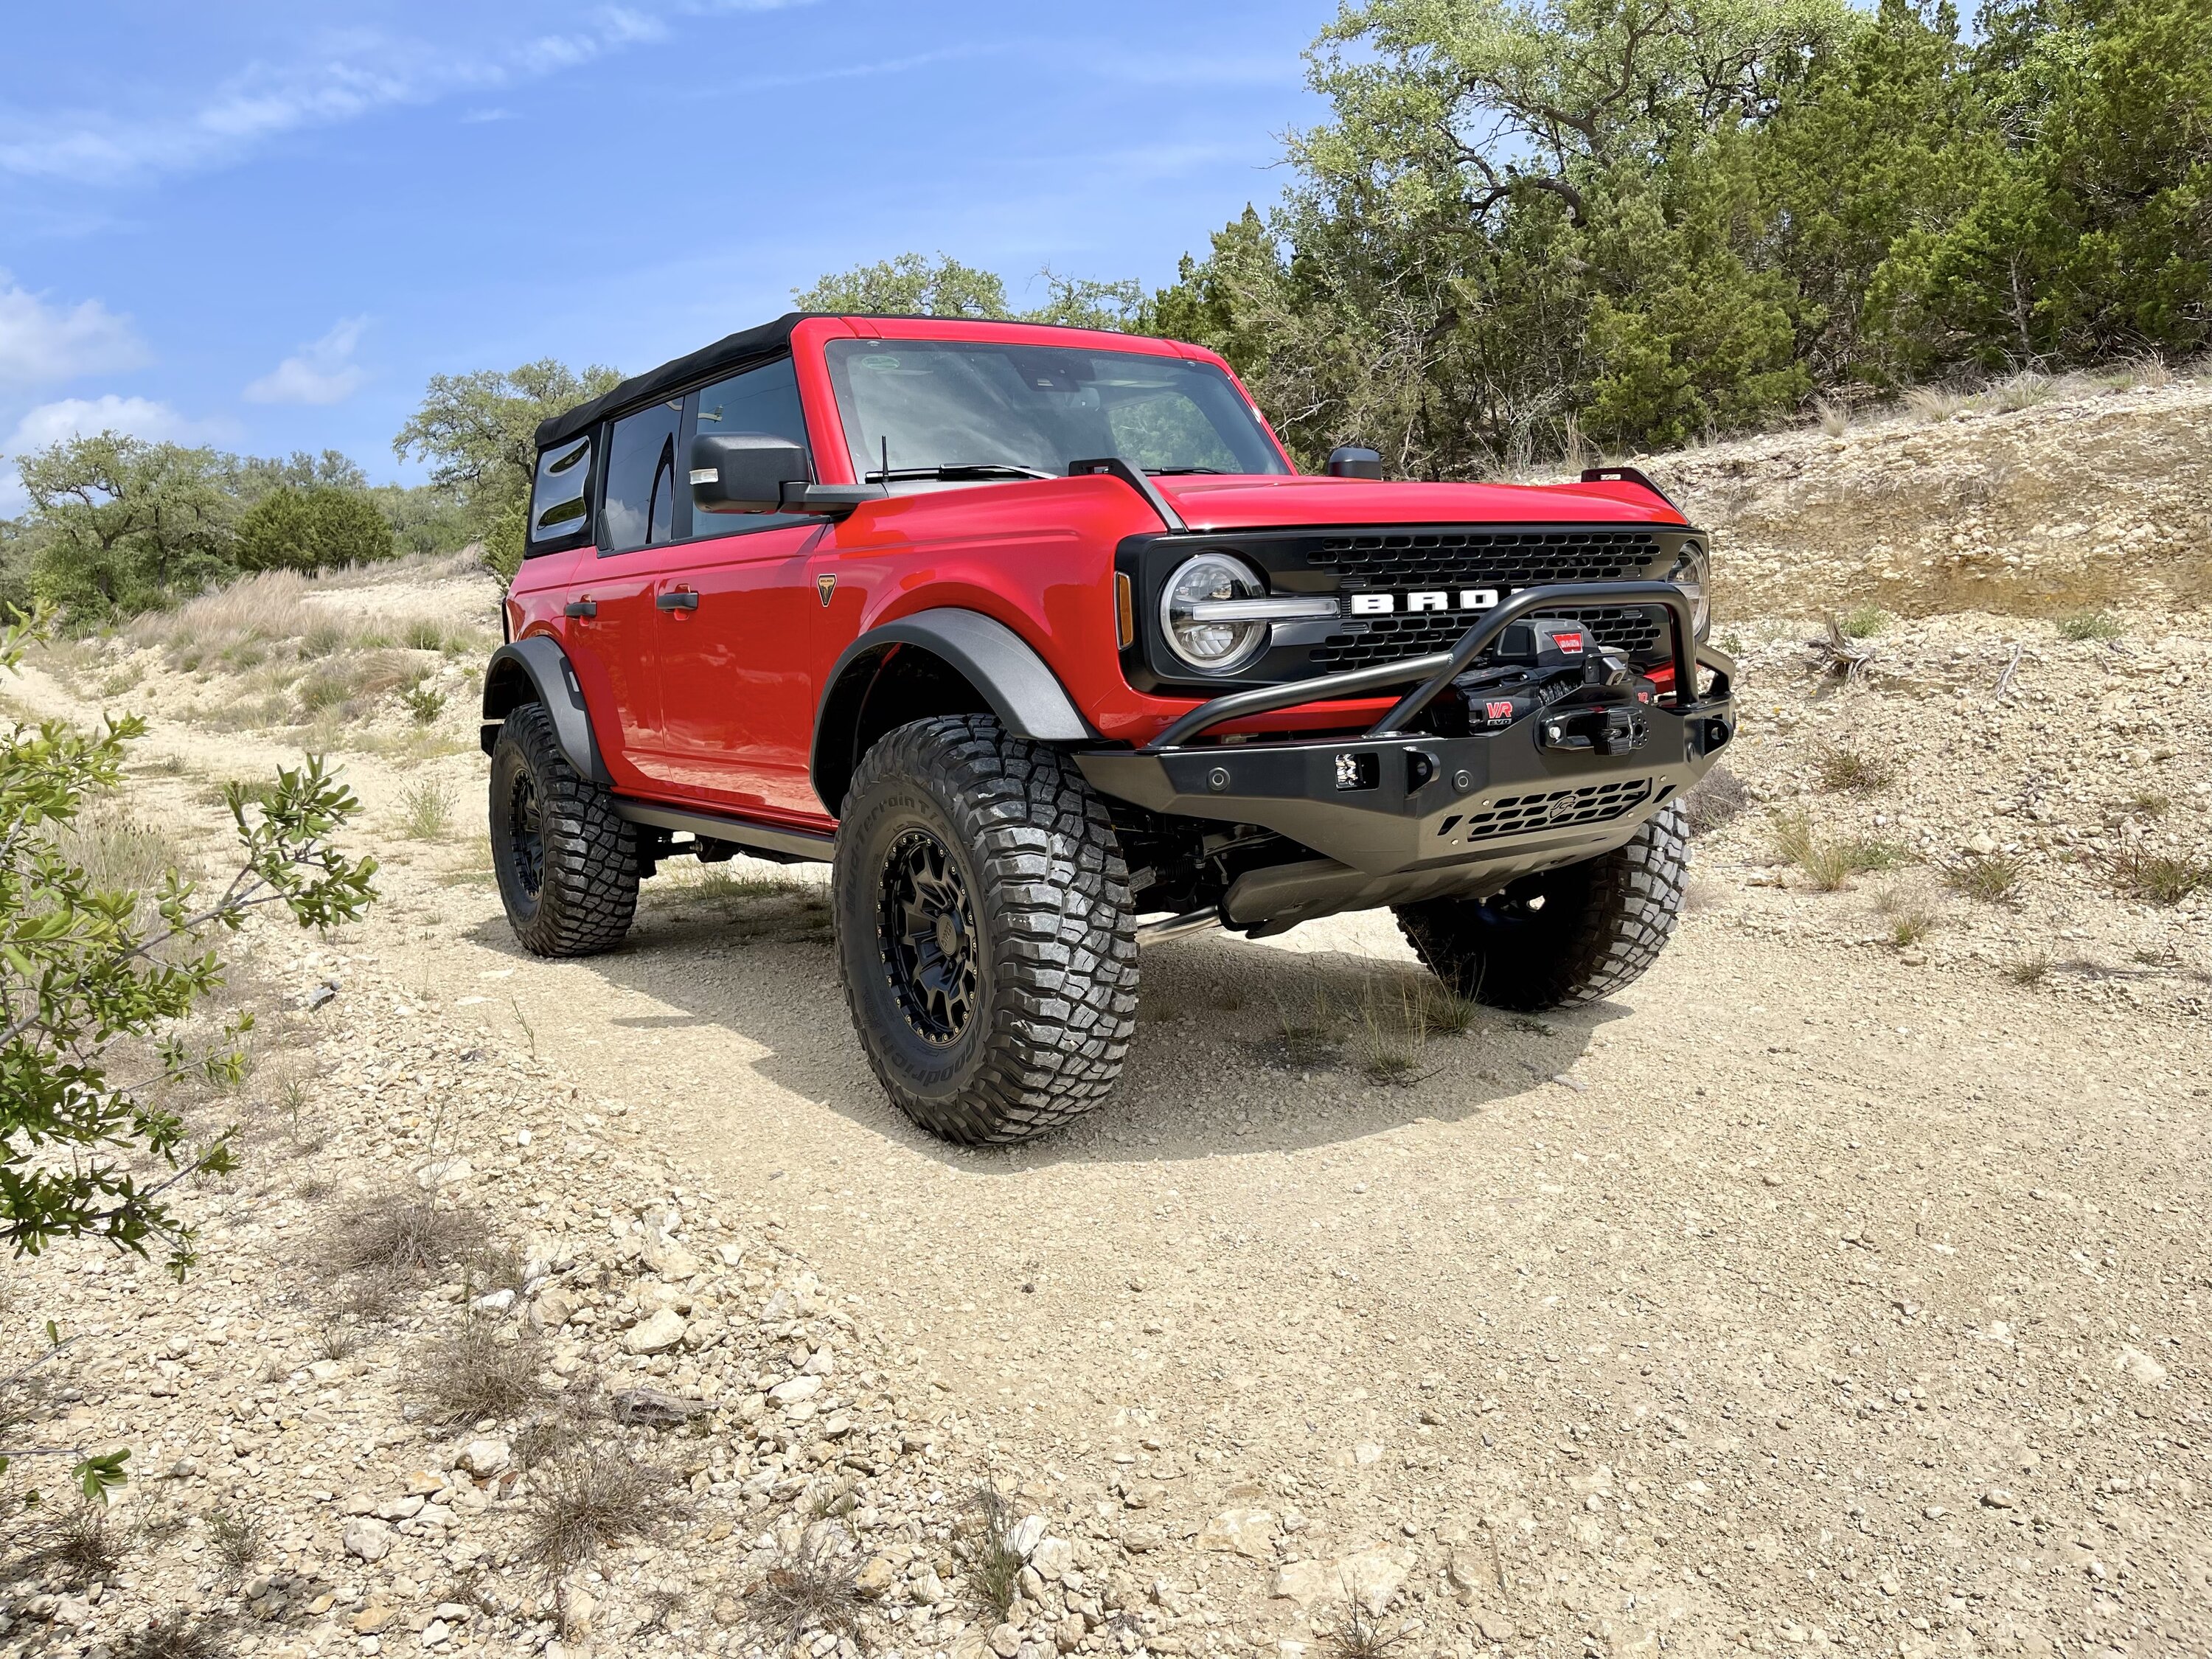 Ford Bronco Let’s see your favorite picture of your Bronco! 20E93E29-70EE-4513-A25D-AA411F48E59C